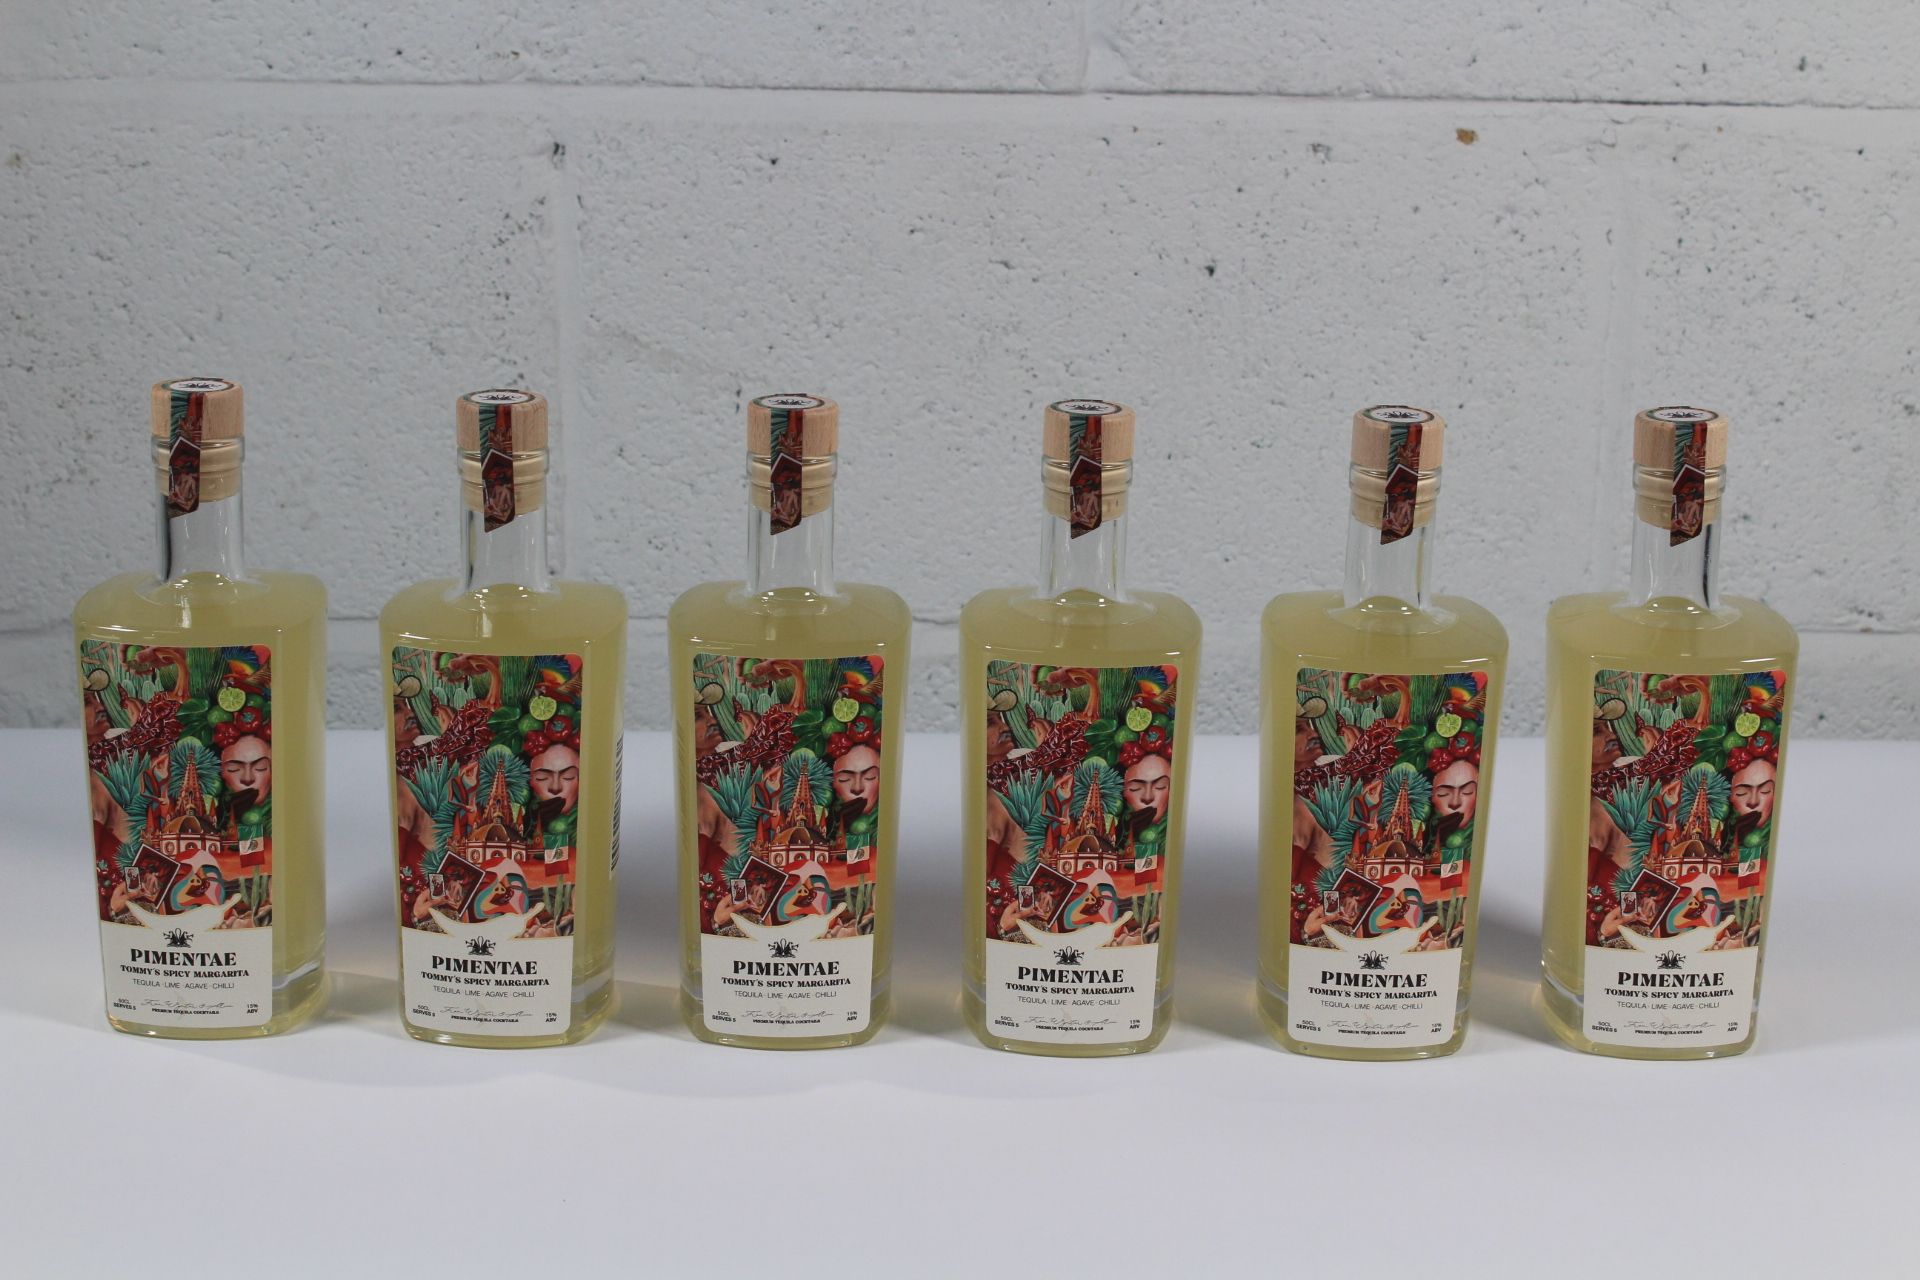 Six Pimentae Tommy's Spicy Margarita Tequila - Lime - Agave - Chilli 6 x 500ml.